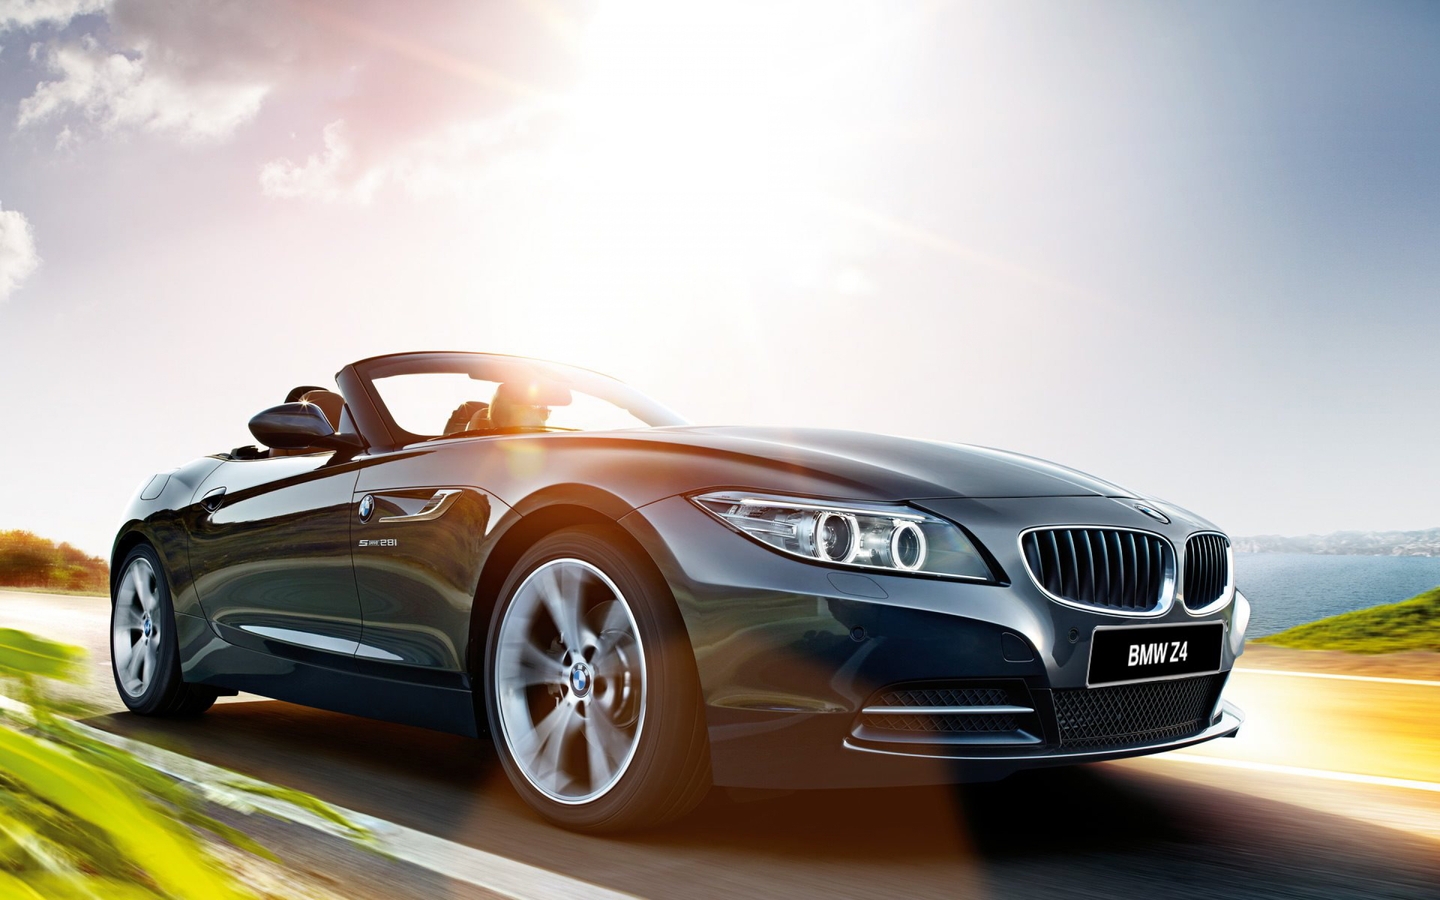 Image: Roadster, coupe, BMW, Z4, movement, speed, light, sun, sky